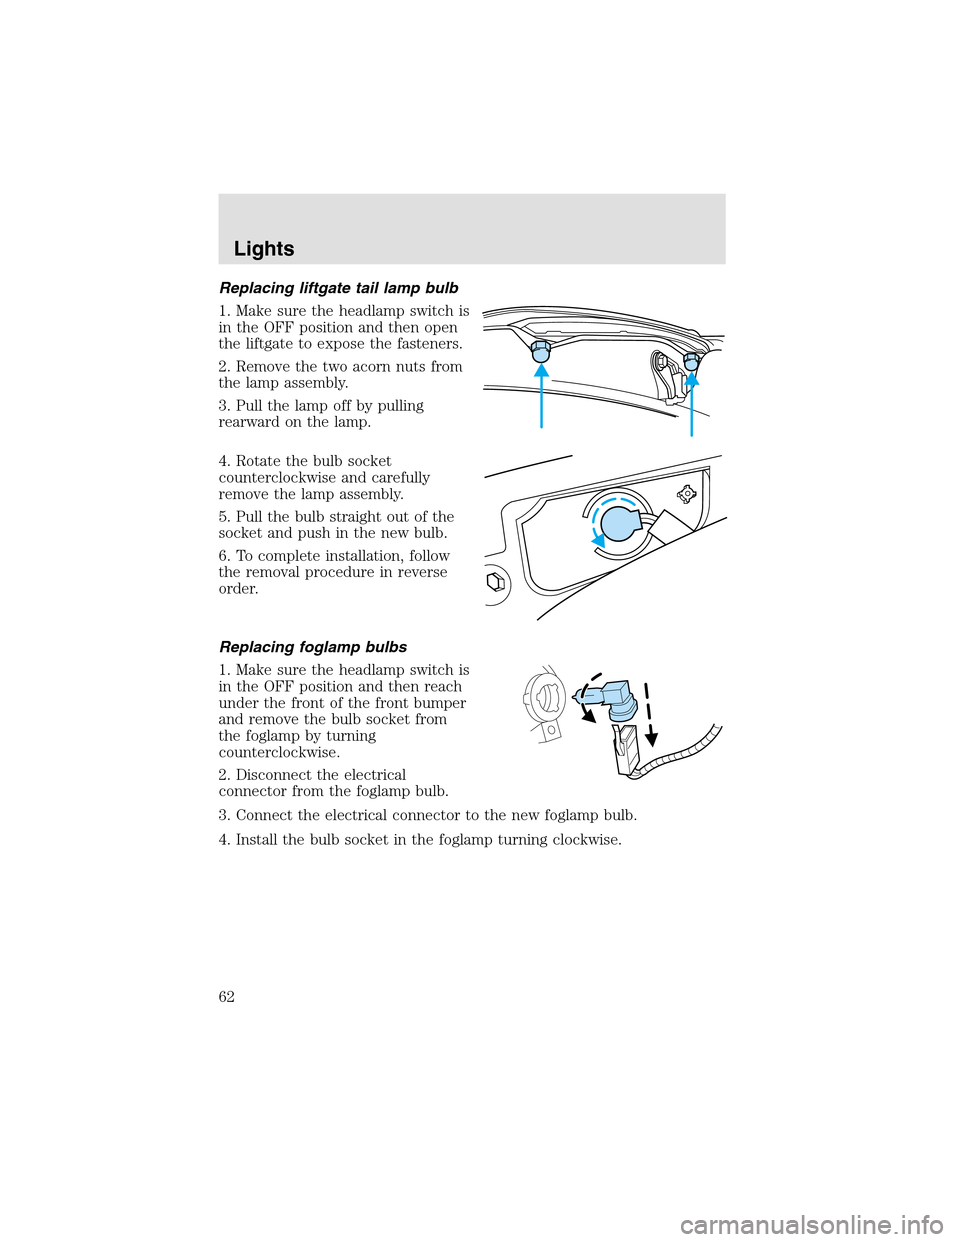 LINCOLN AVIATOR 2003 Repair Manual Replacing liftgate tail lamp bulb
1. Make sure the headlampswitch is
in the OFF position and then open
the liftgate to expose the fasteners.
2. Remove the two acorn nuts from
the lampassembly.
3. Pull